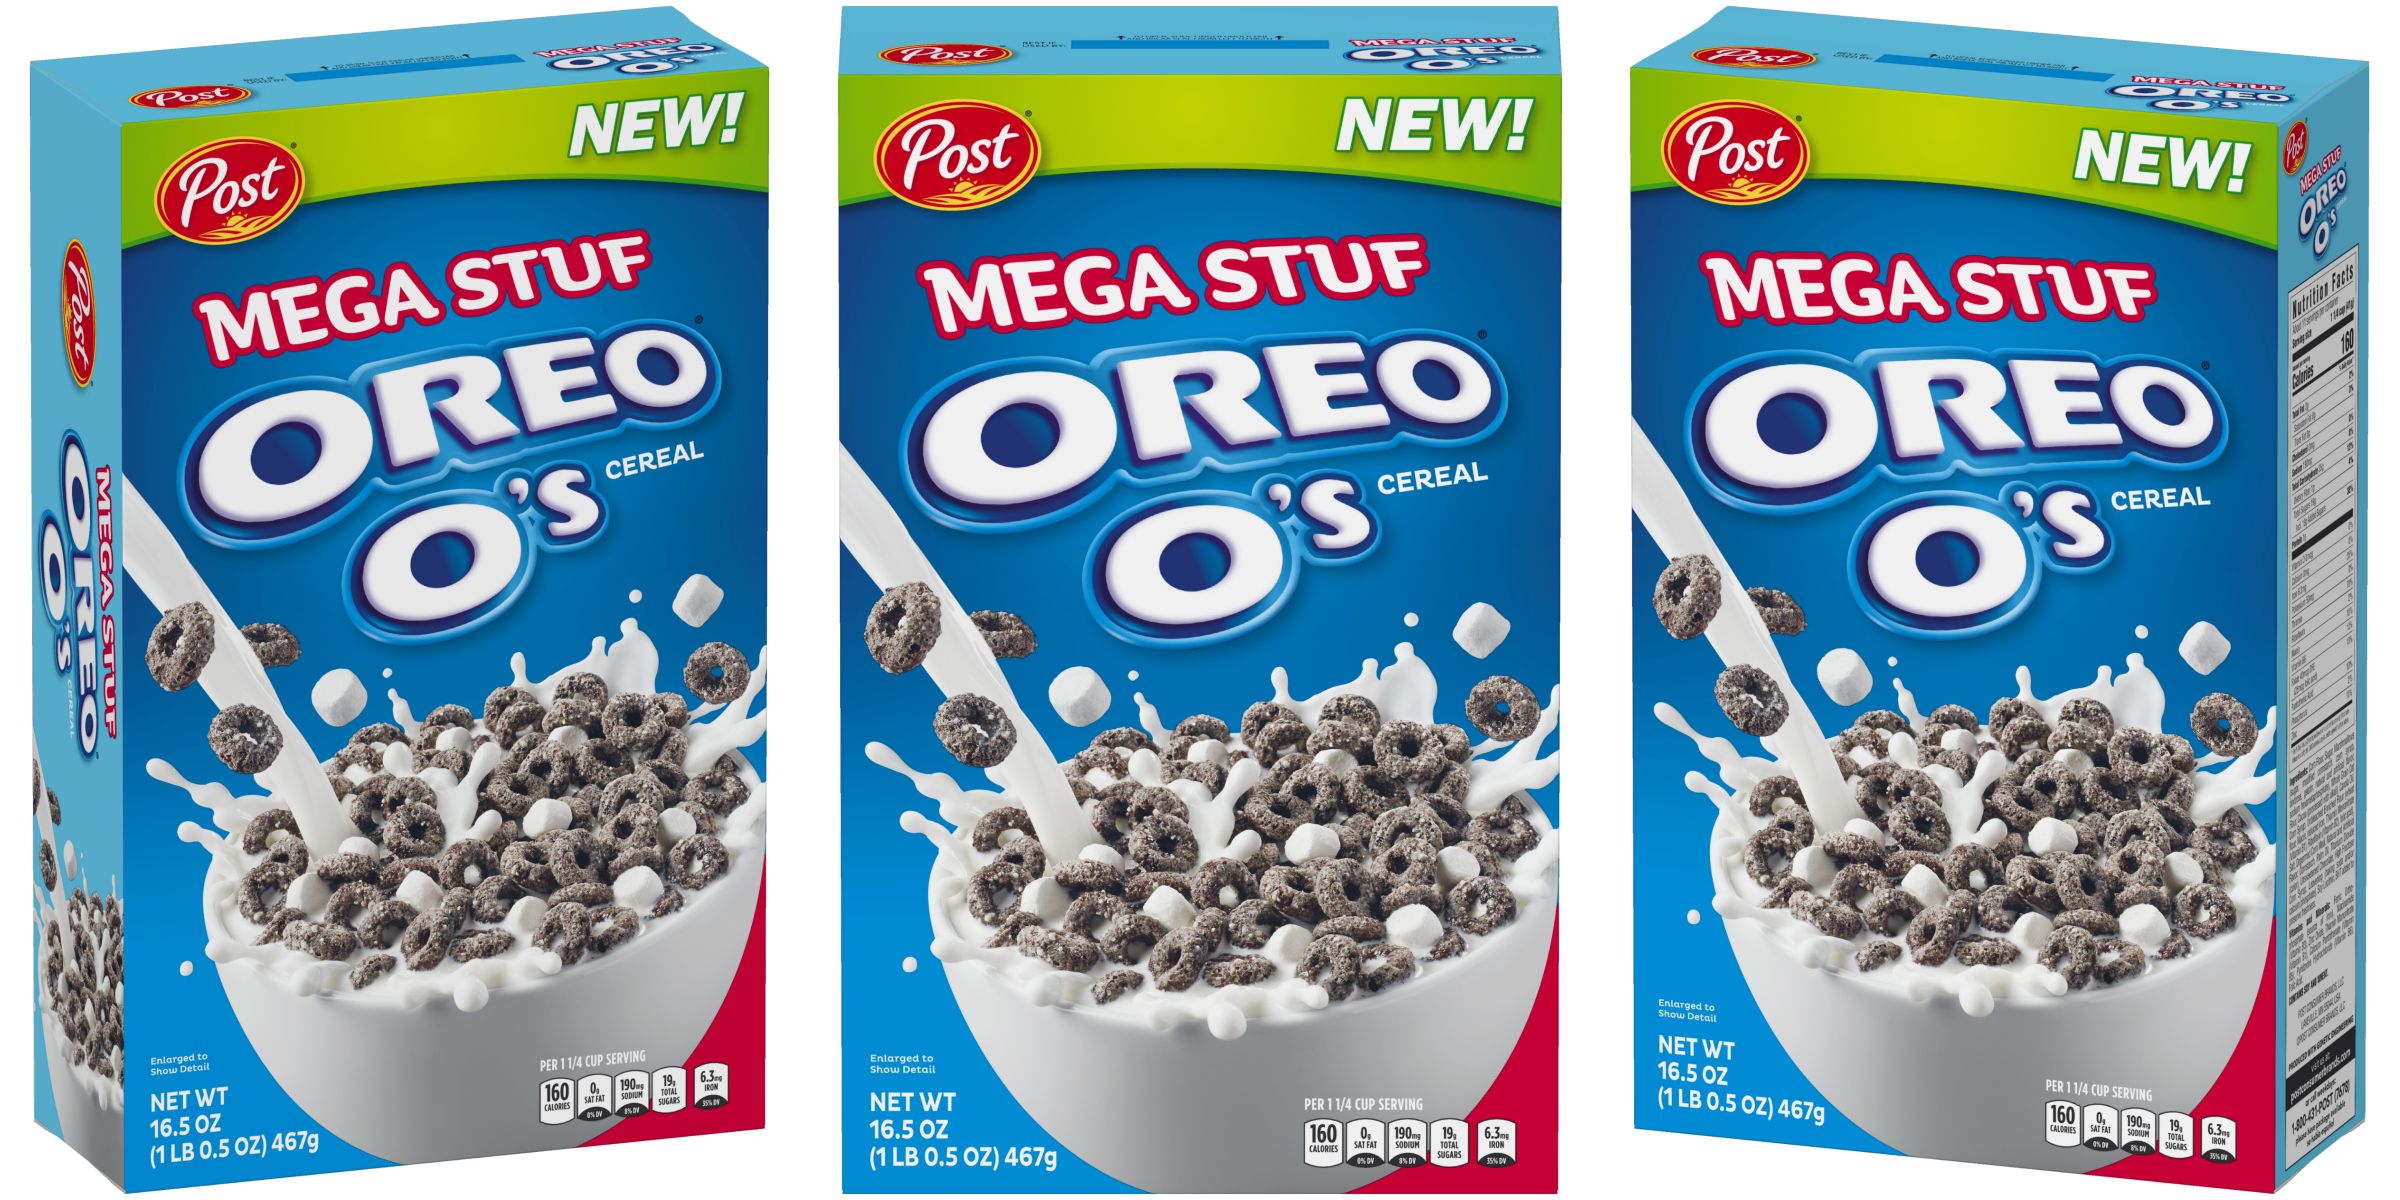 Post Introduces Mega Stuf Oreo O S Cereal At Walmart And It S Loaded With Marshmallows